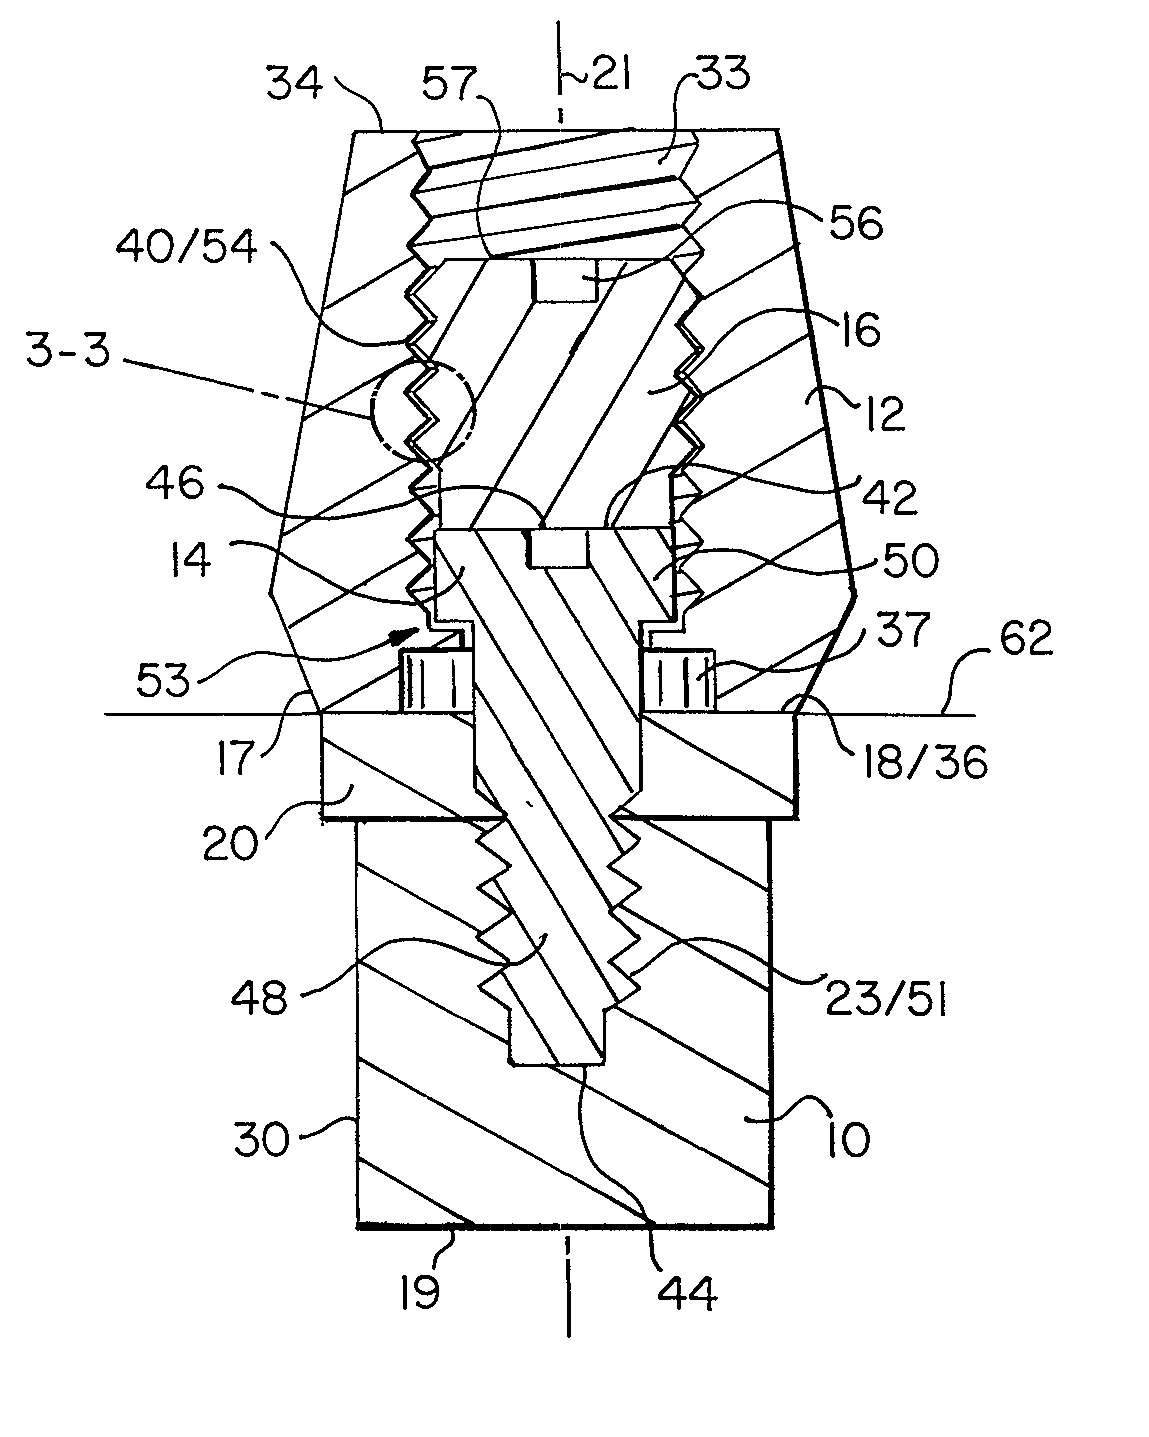 System of securement of dental abutments to dental implants